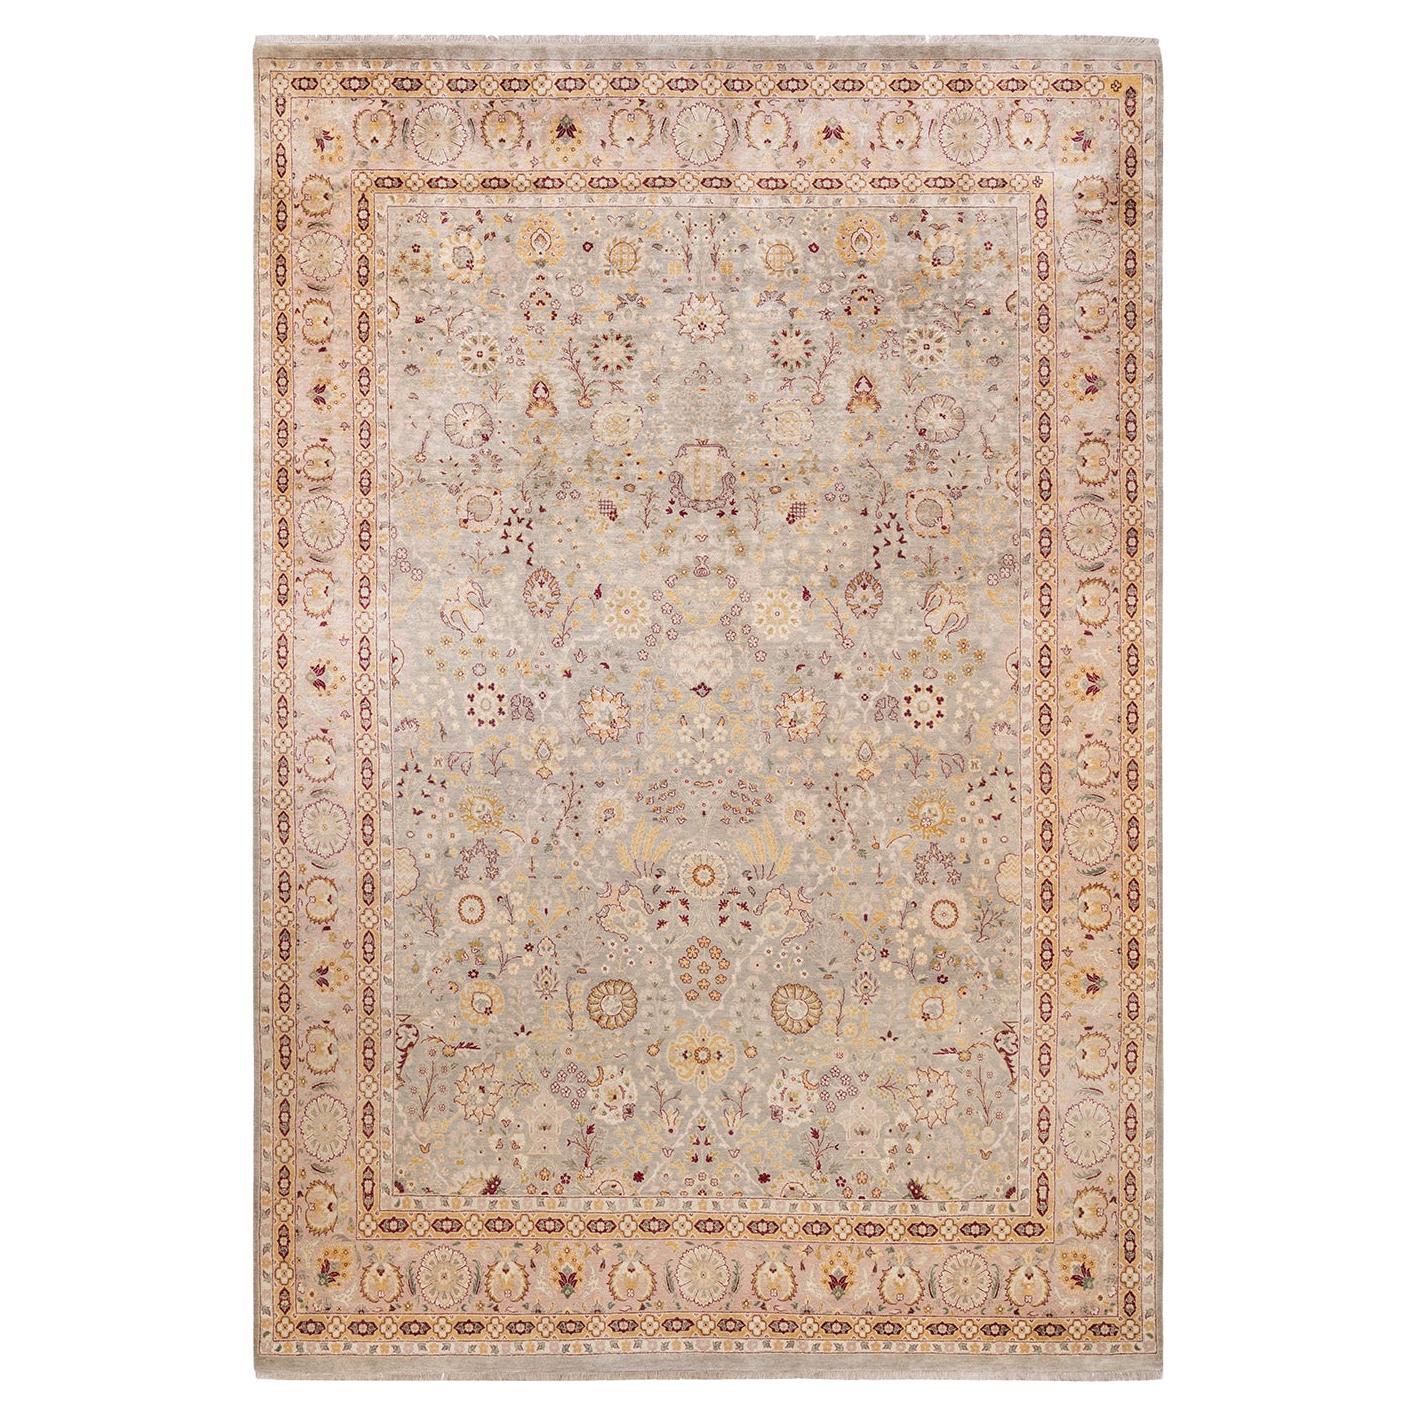 Traditional Mogul Hand Knotted Wool Ivory Area Rug